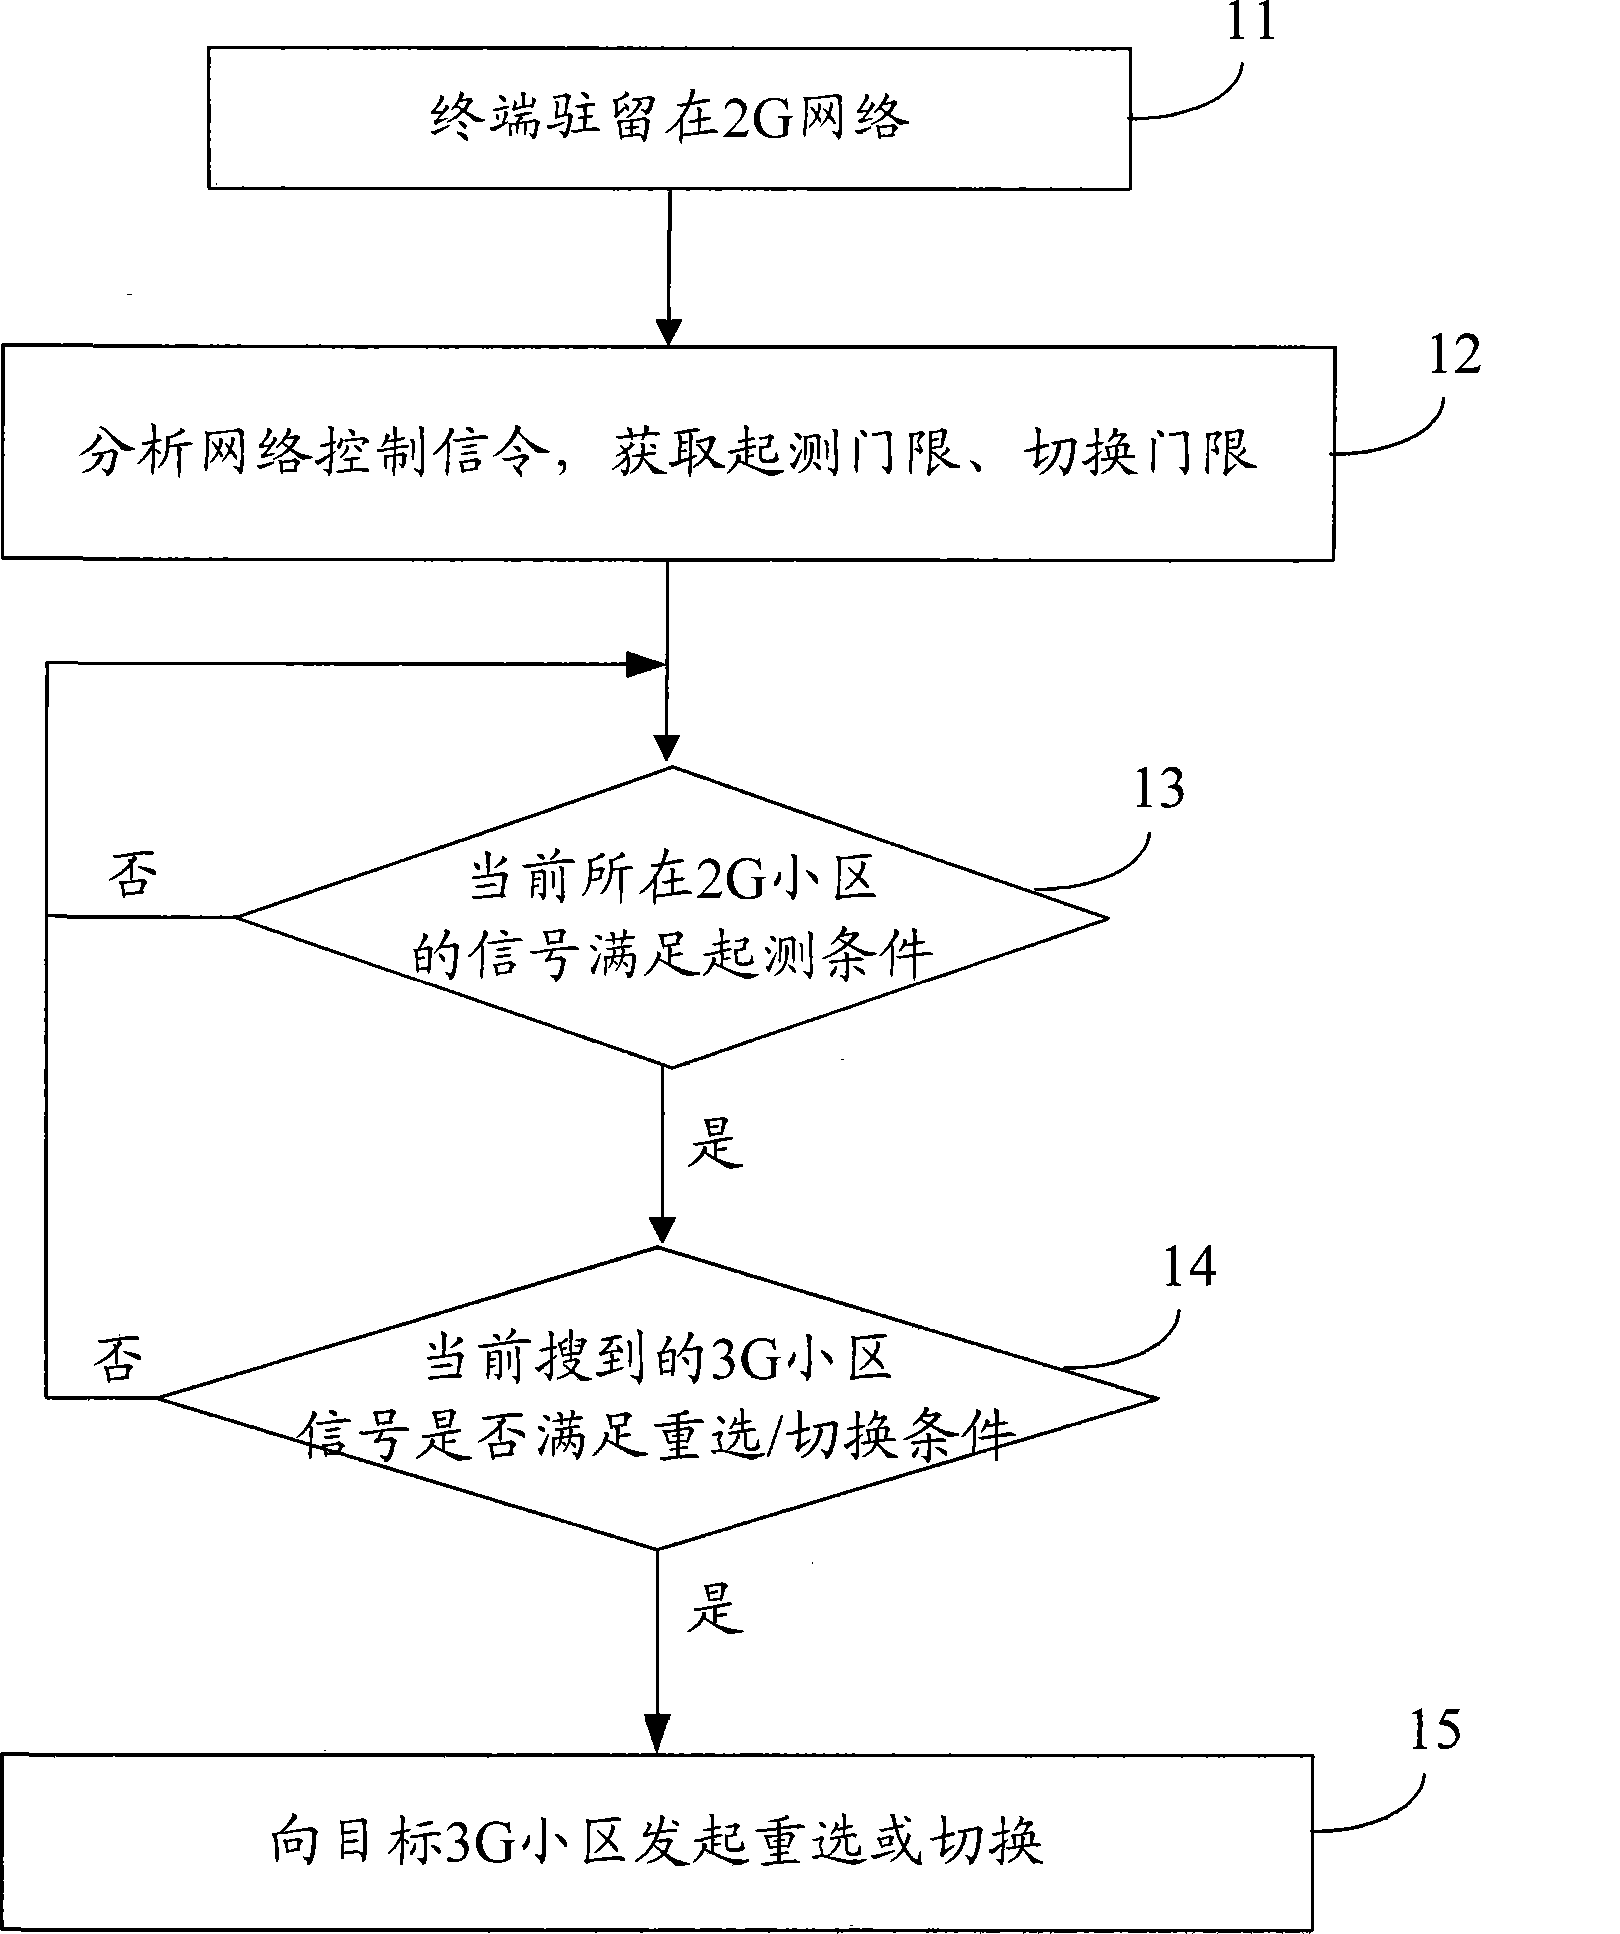 Method and terminal for selecting service bearing network